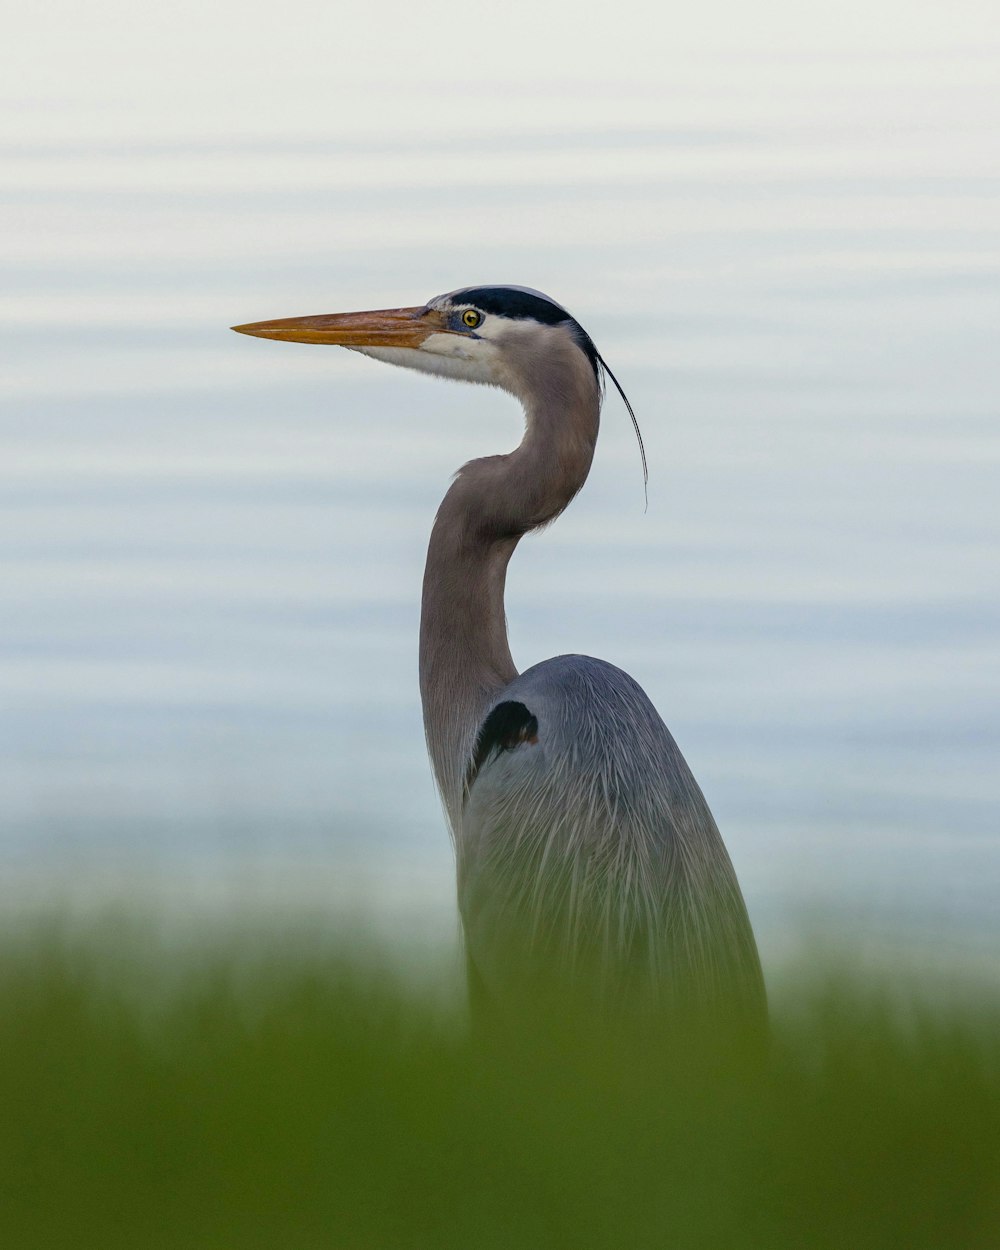 a bird with a long neck standing in the grass